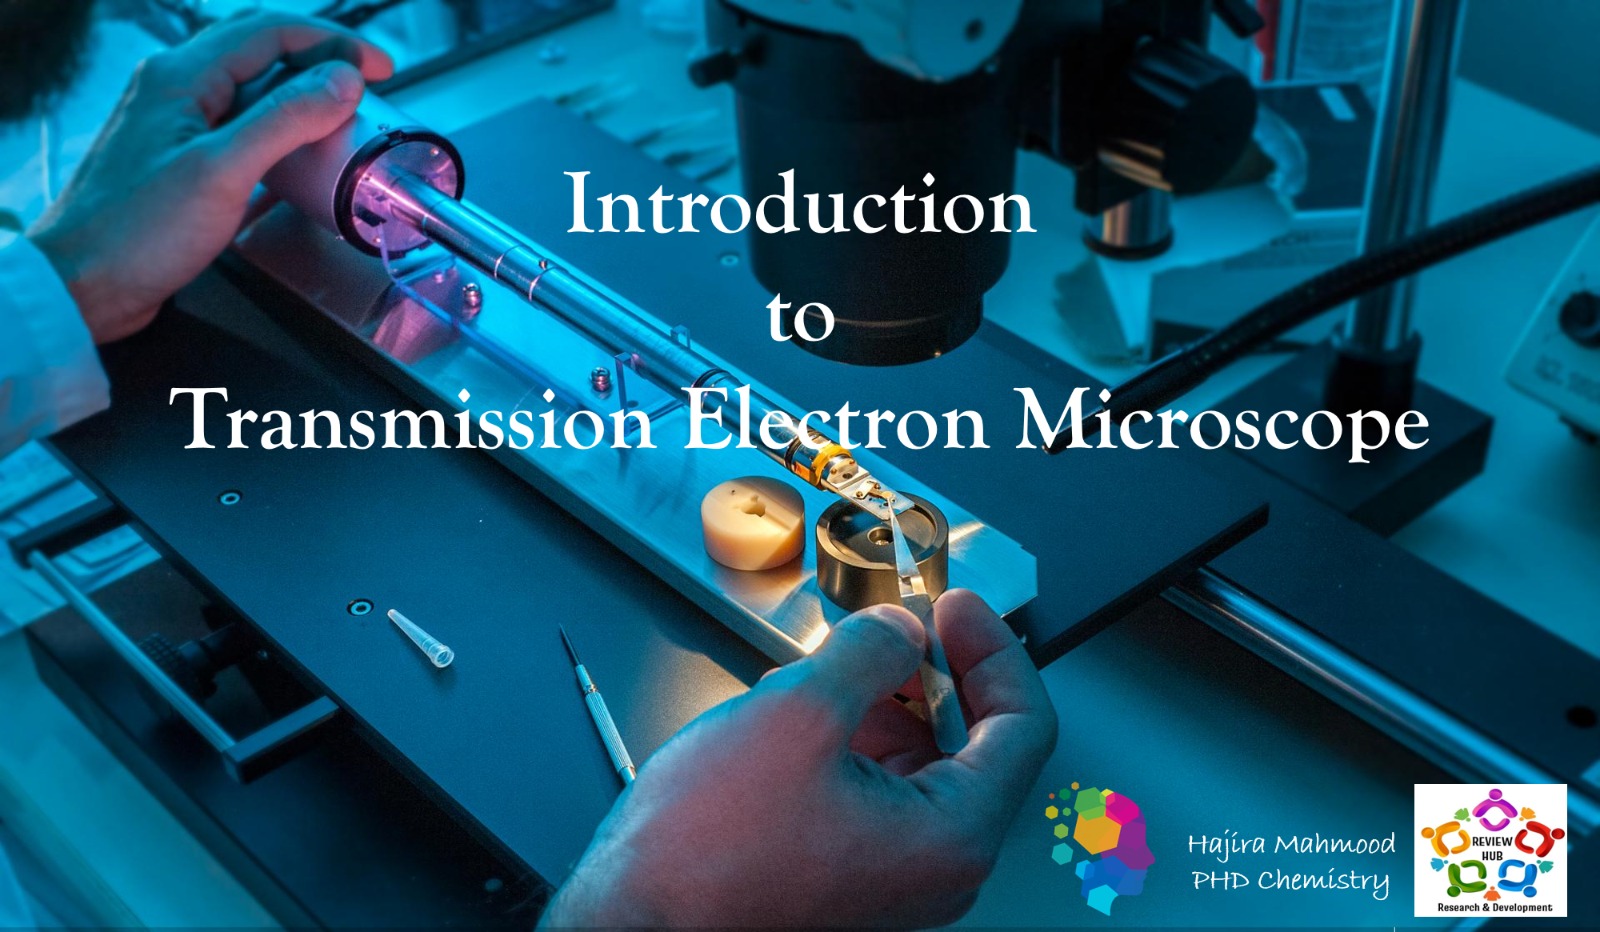 Introduction to Transmission Electron Microscope